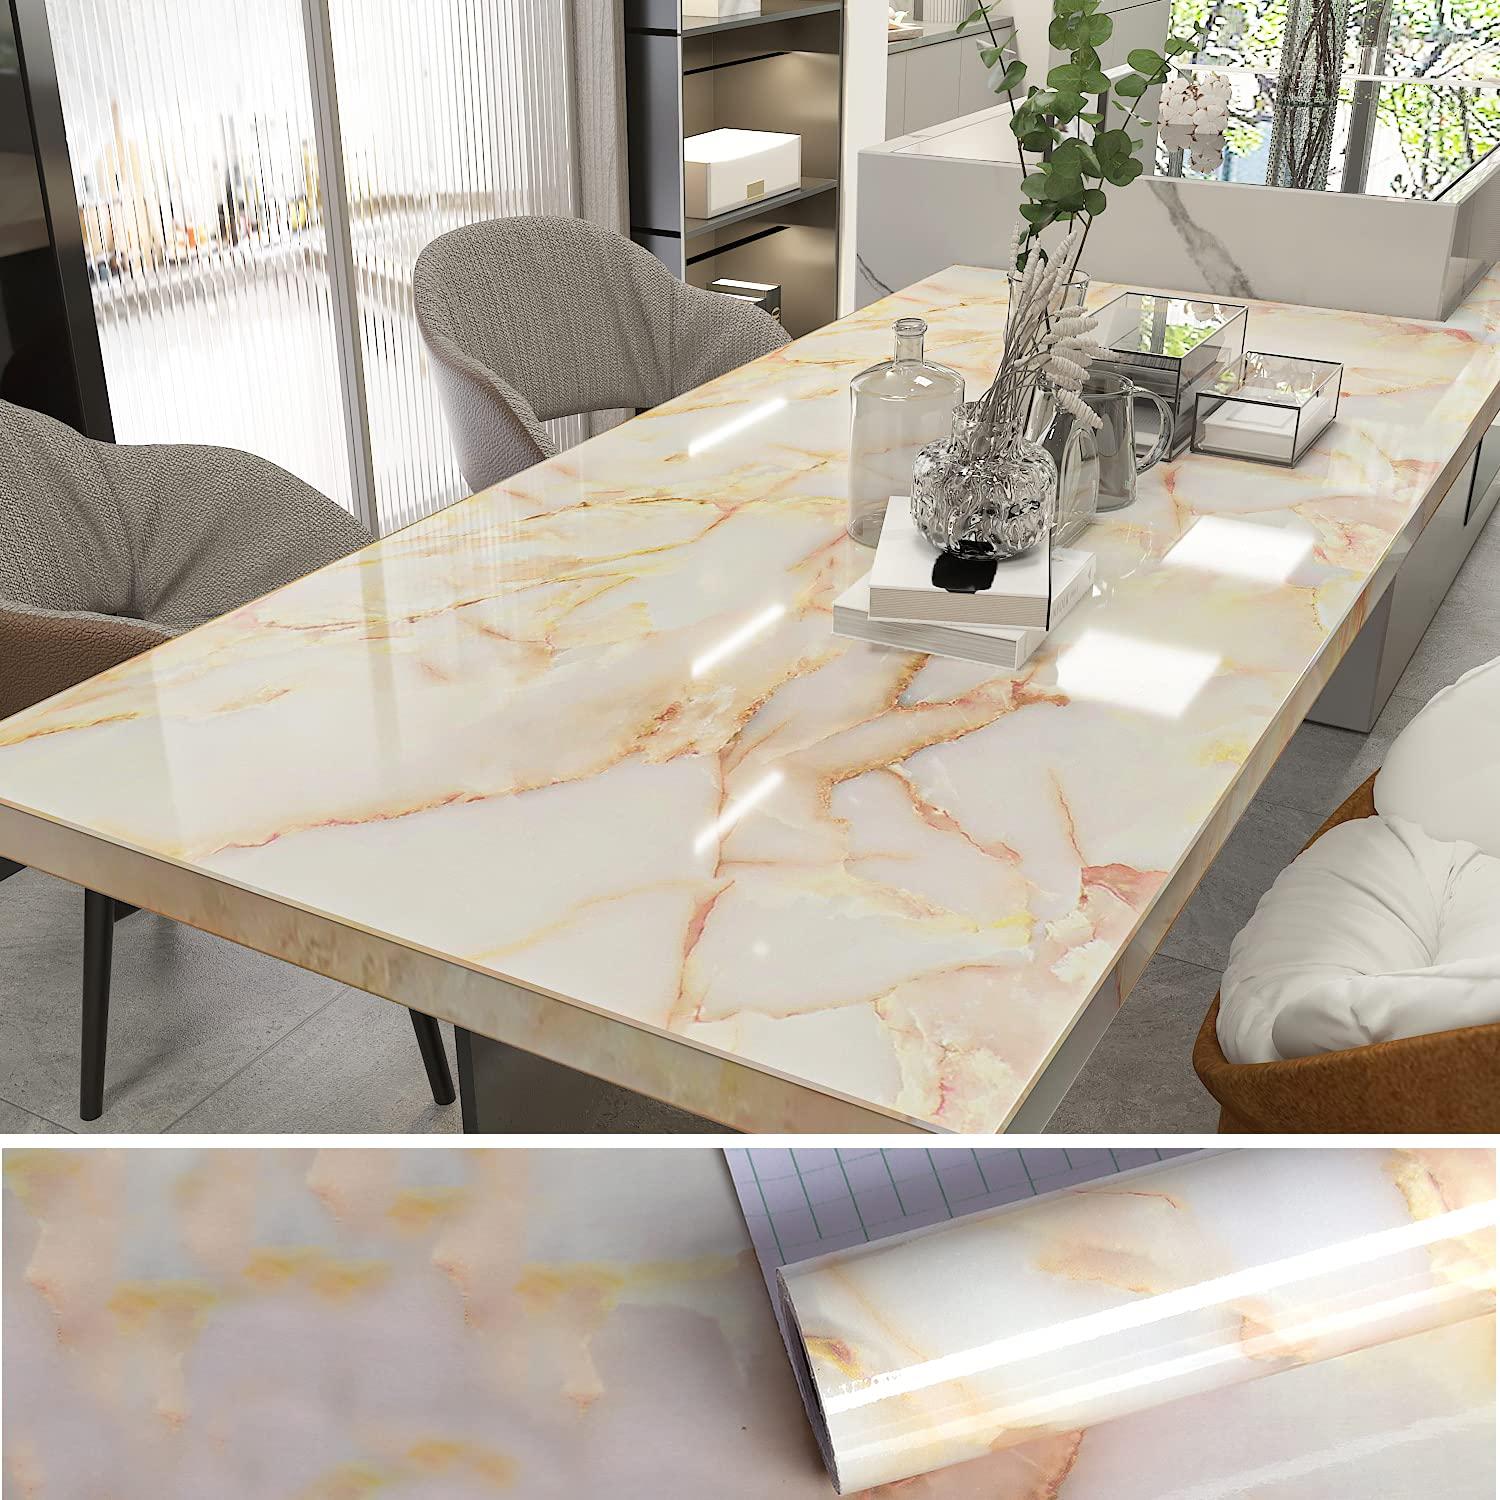 VEELIKE Yellow Marble Wallpaper 40cm x 1800cm Marble Vinyl Wrap for Kitchen Worktop Covering Vinyl Self Adhesive Contact Paper Kitchen Counter Vinyl Wrap Dinning Table Bathroom Waterproof Removable